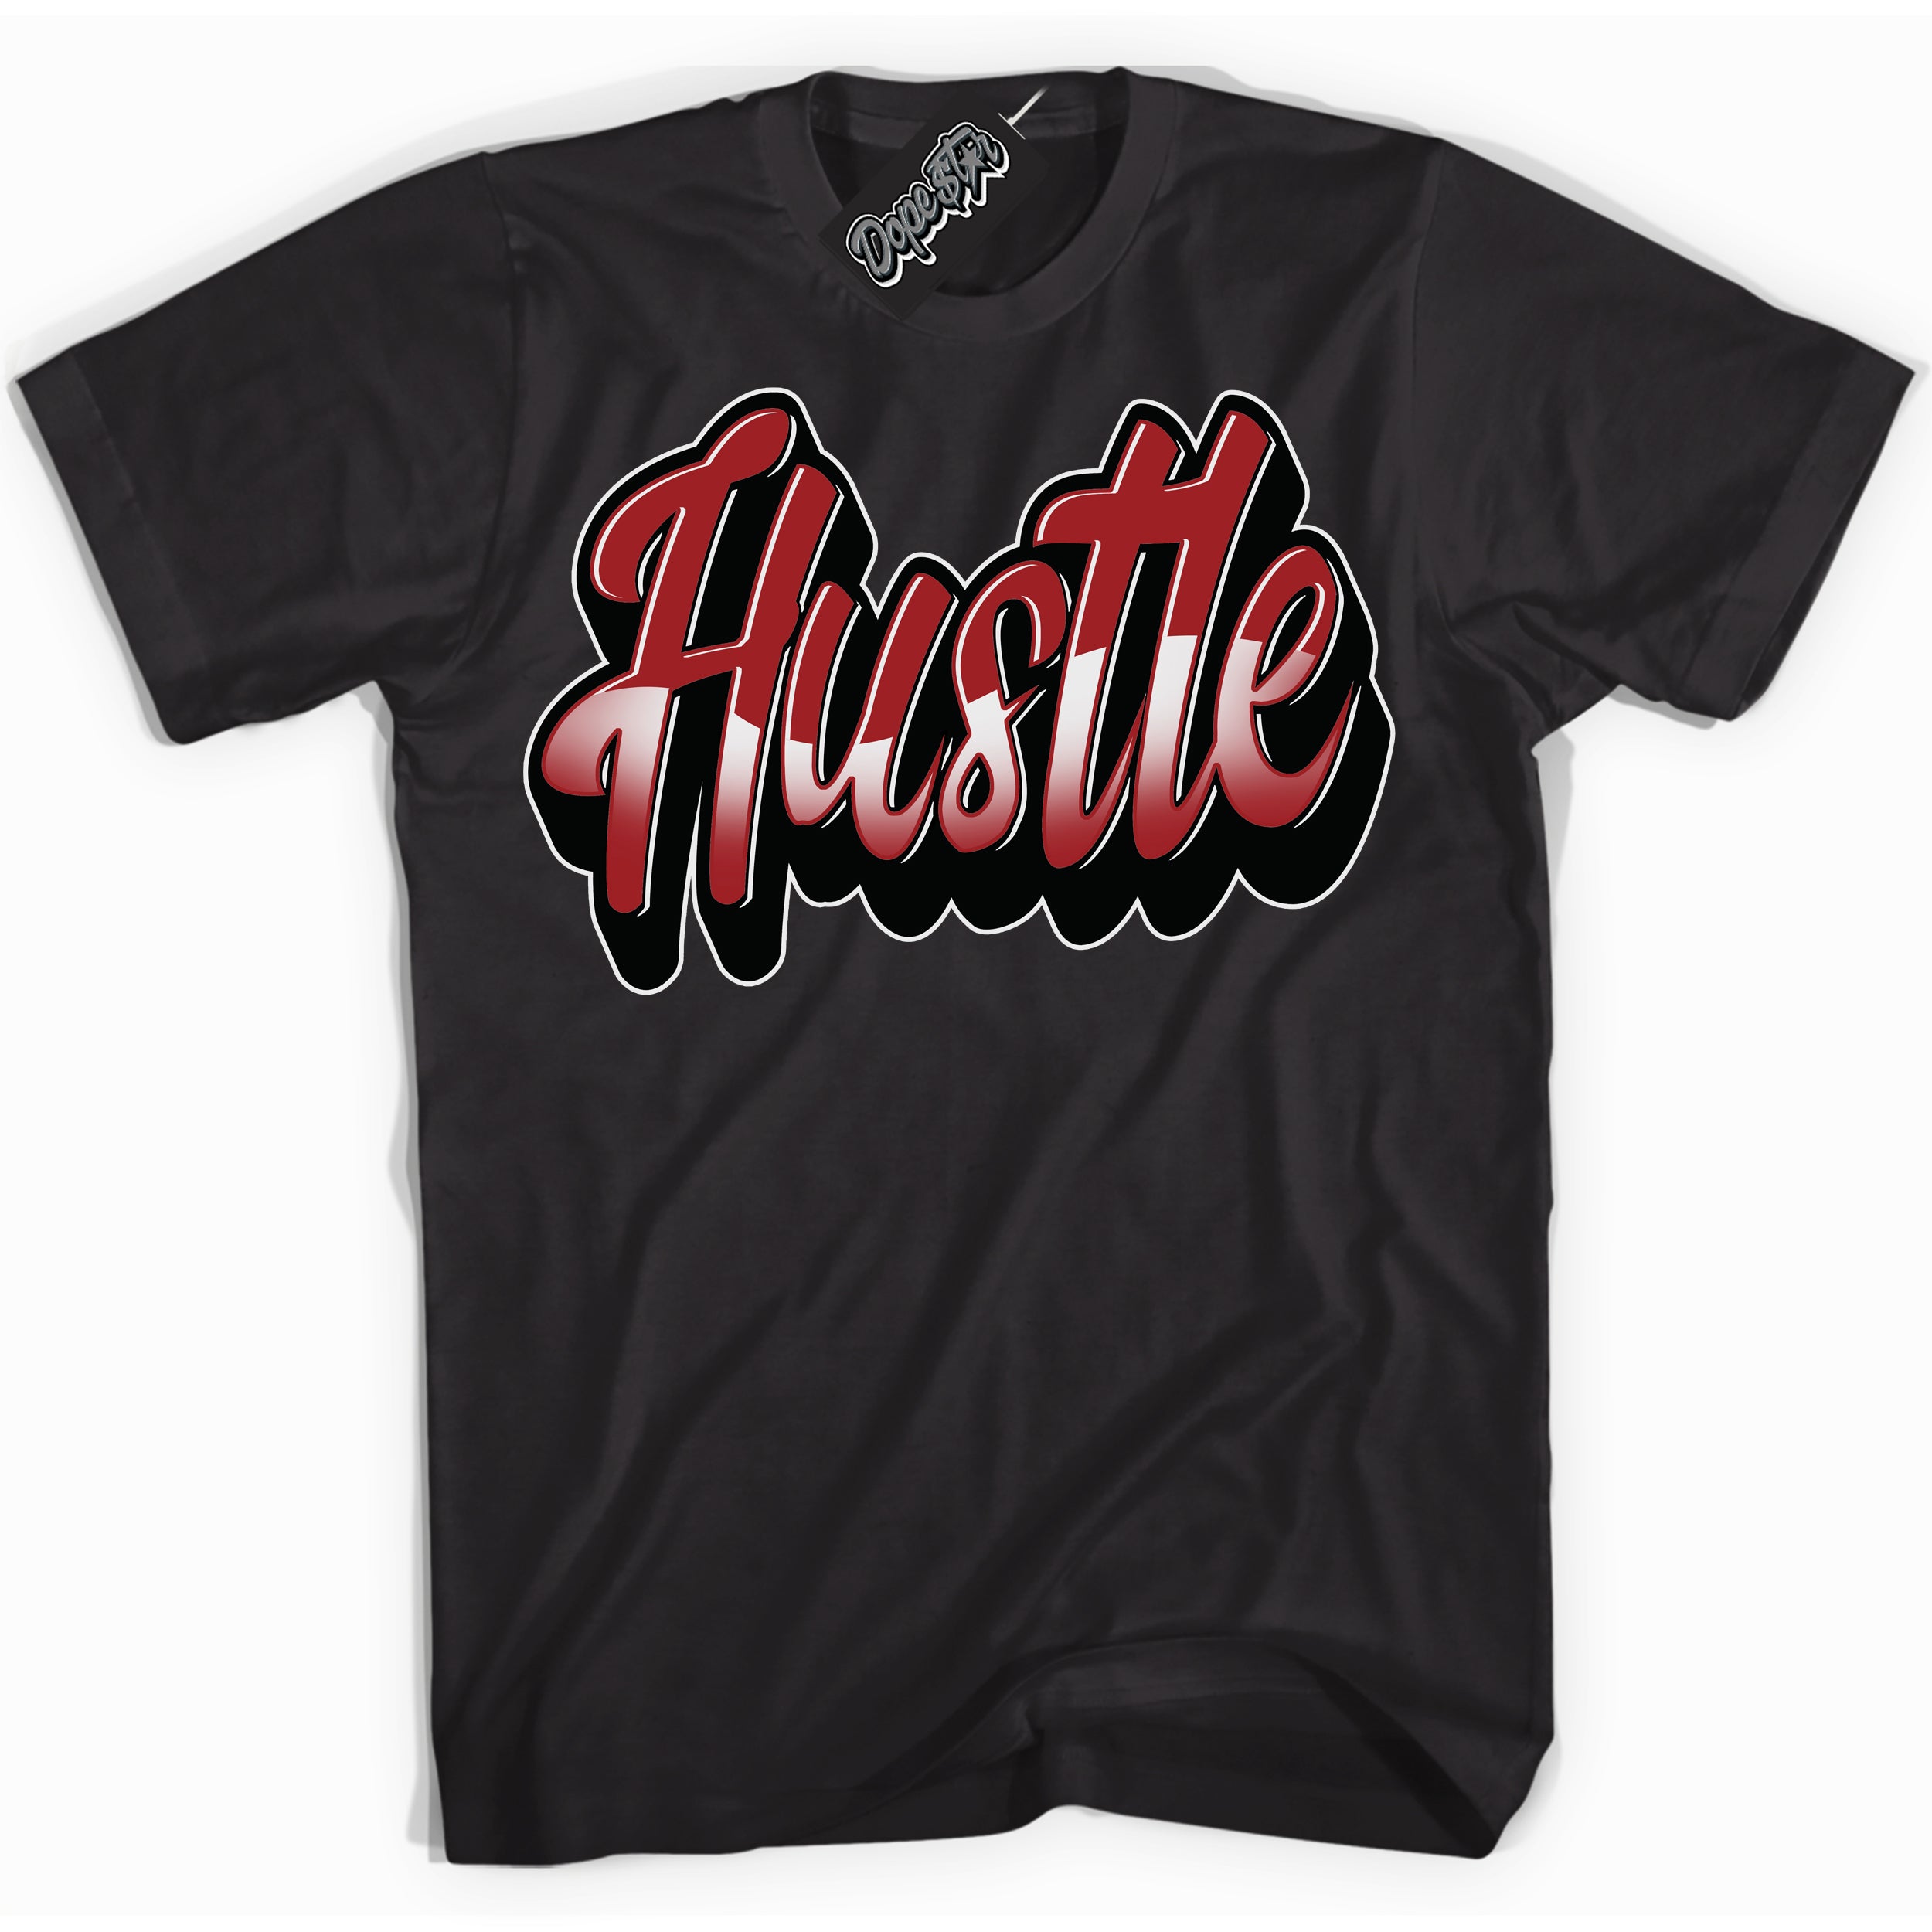 Cool Black graphic tee with “ Hustle 2 ” print, that perfectly matches Lost And Found 1s sneakers 